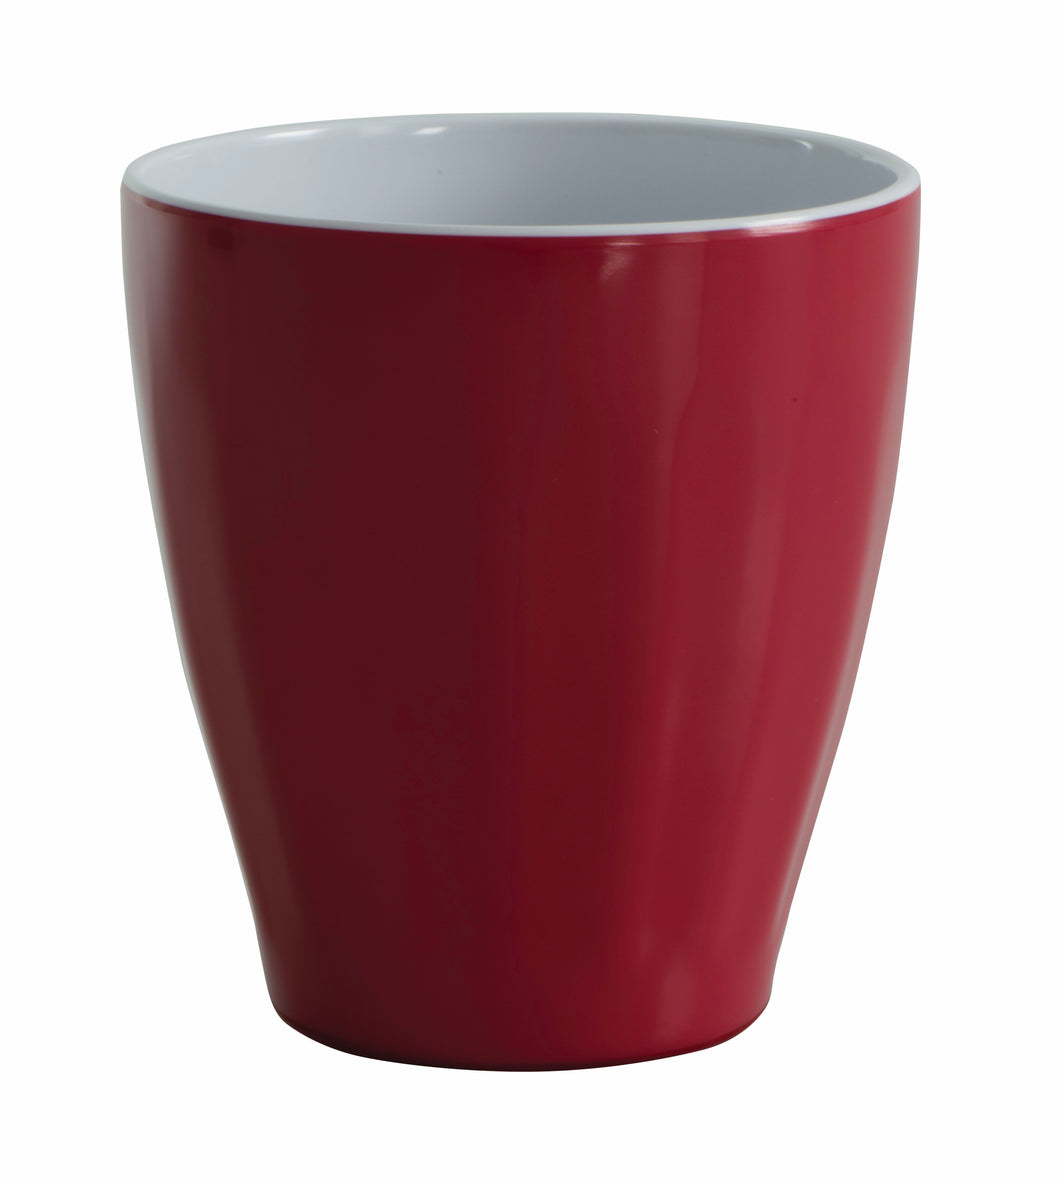 Avanti Tumbler Melamine 300ml Cup - Red Available as a set or individually